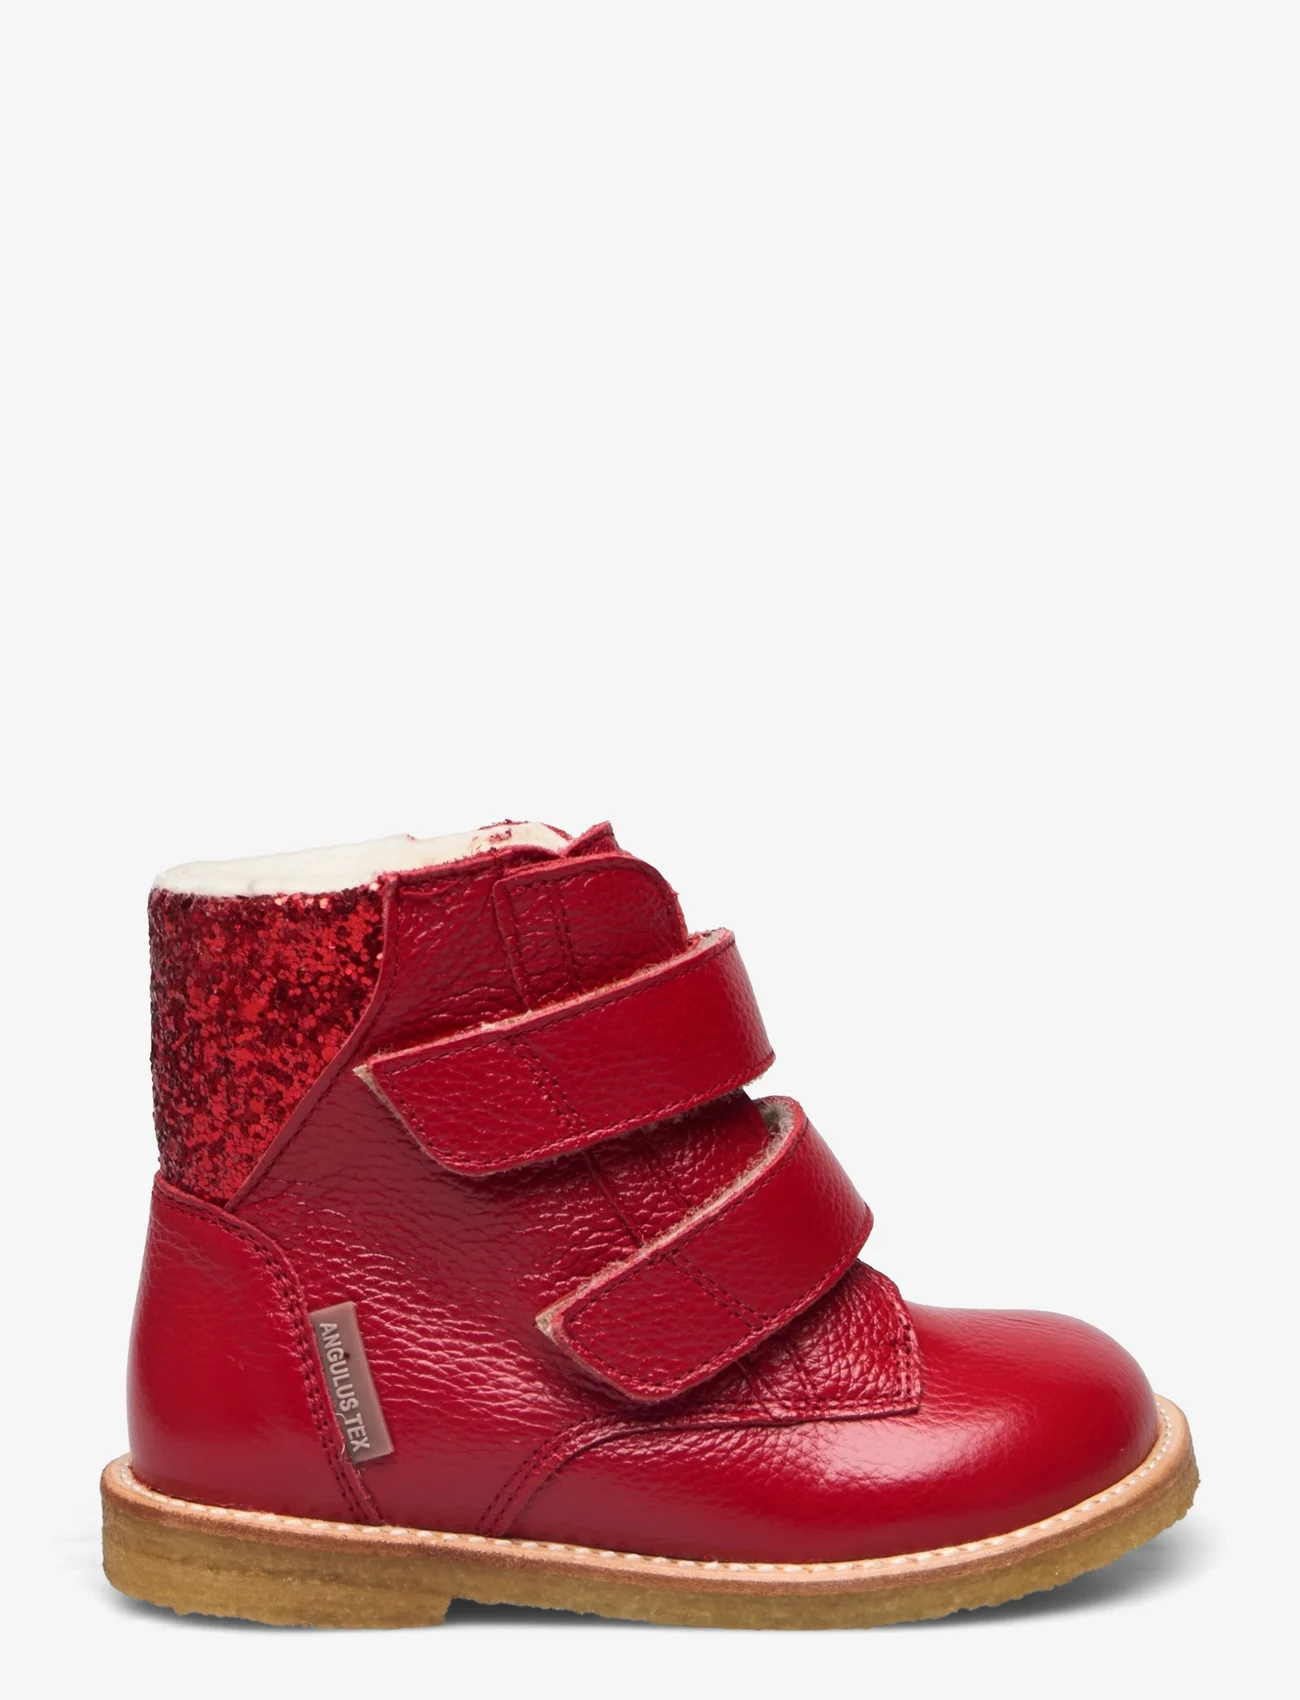 ANGULUS - Boots - flat - with velcro - børn - 2568/1711 red/red glitter - 1